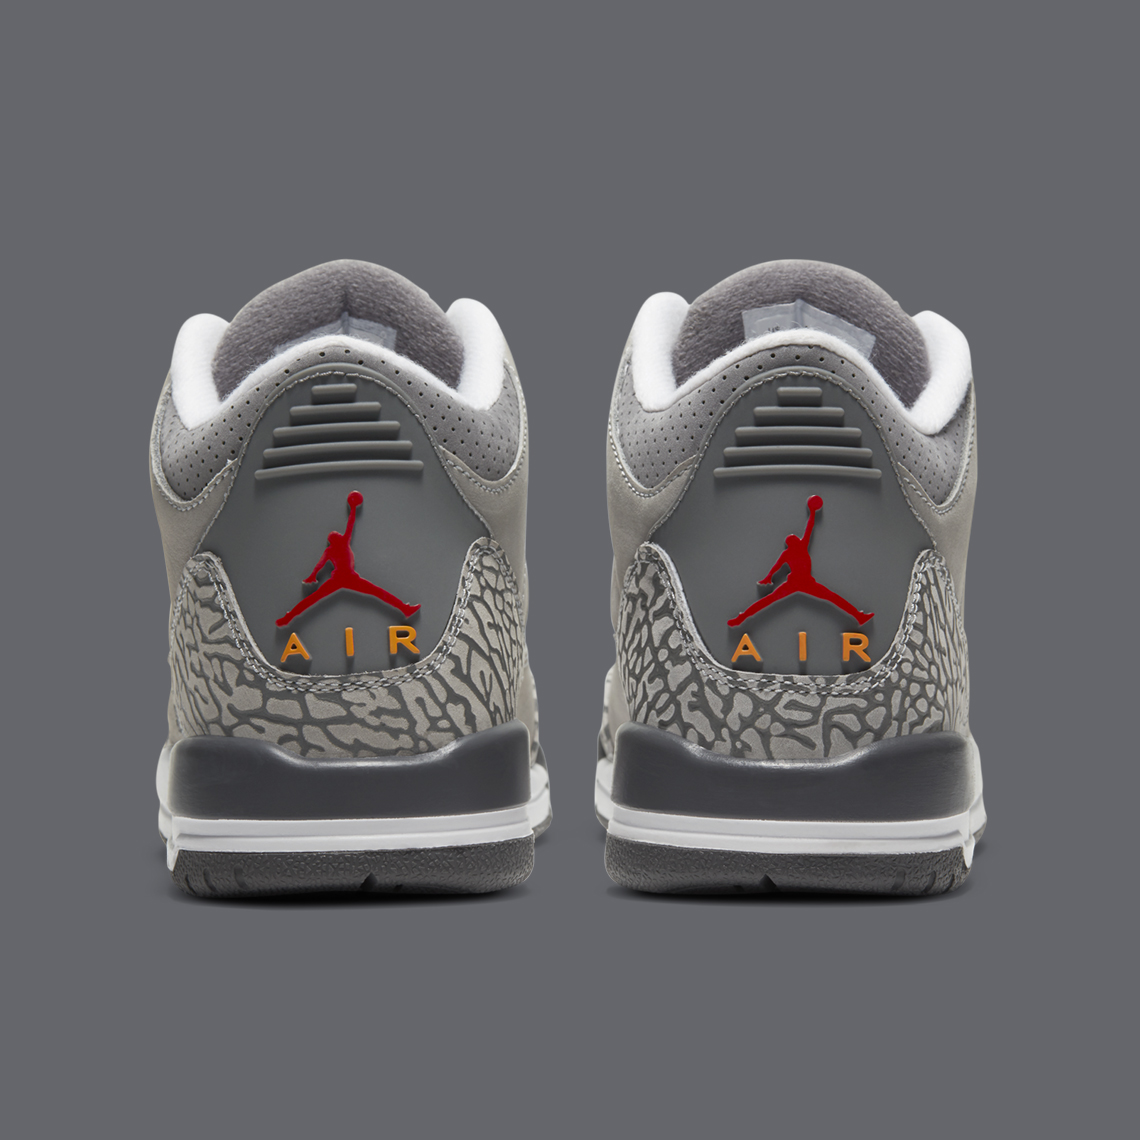 Releasing at jordan xxxiv doors is the Retro Gs Cool Grey 398614 012 Official Images 7